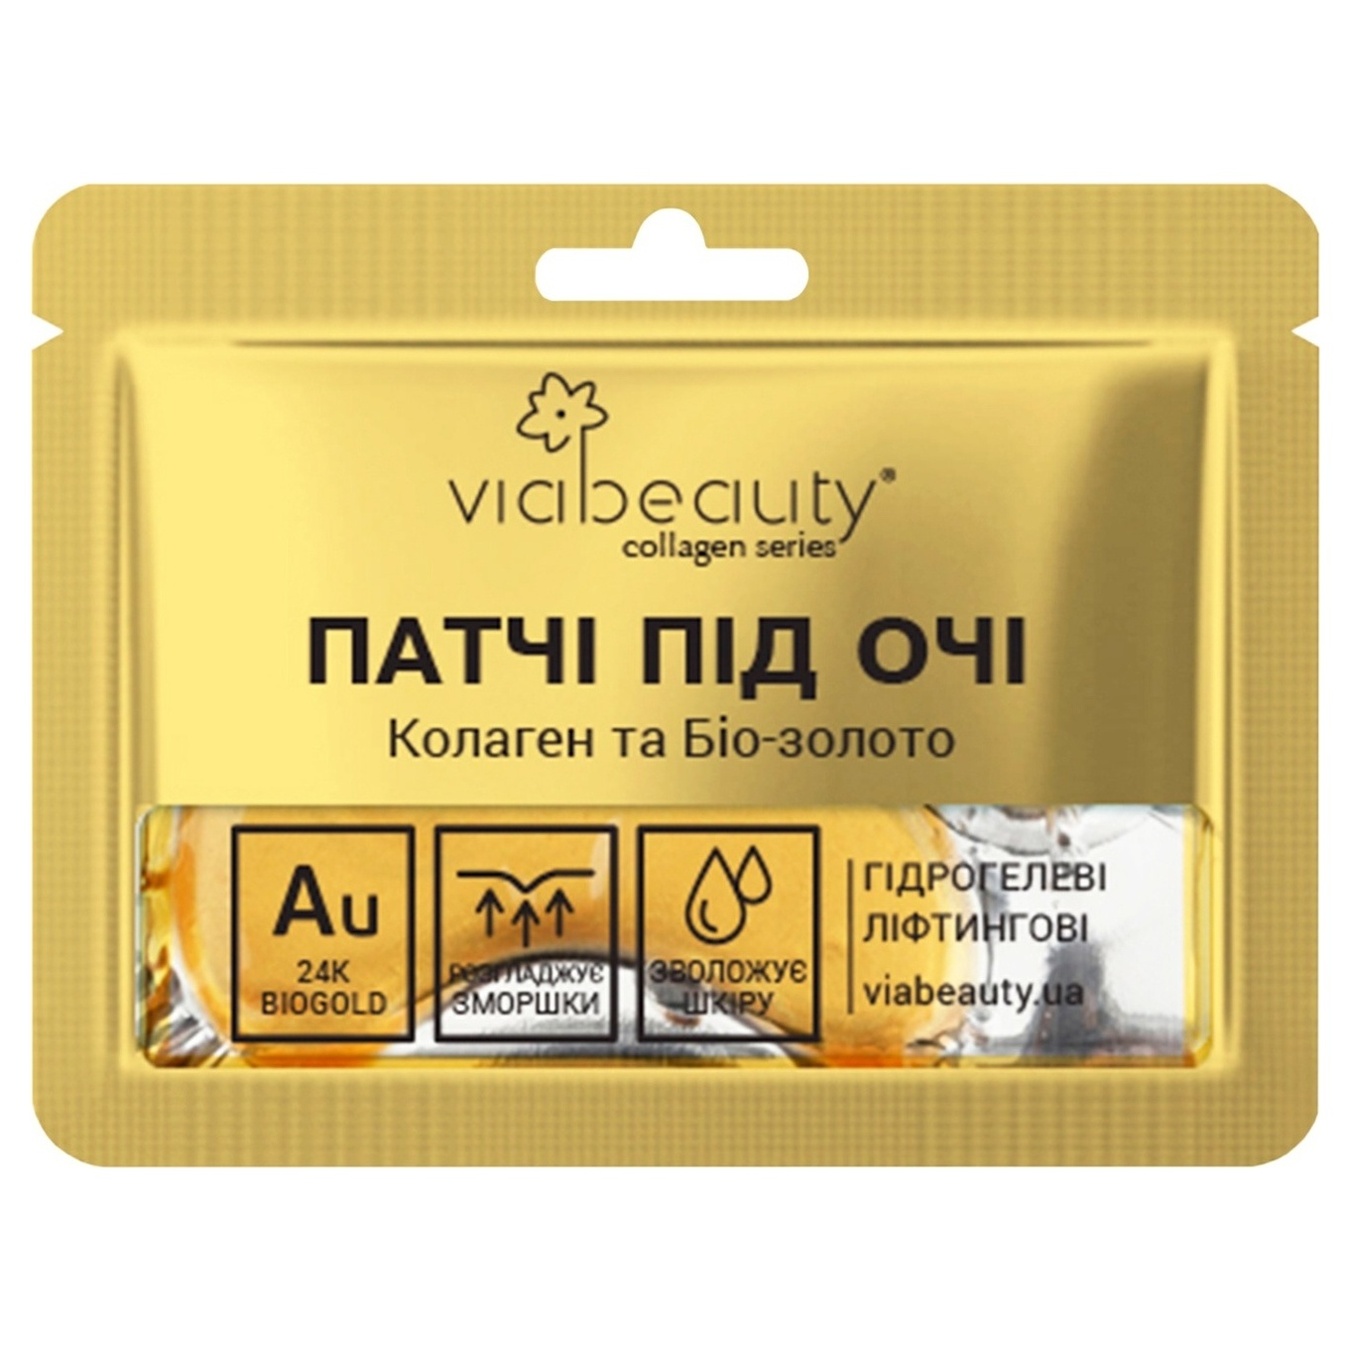 VIABEAUTY hydrogel lifting eye patches with collagen and bio-gold 1 pc